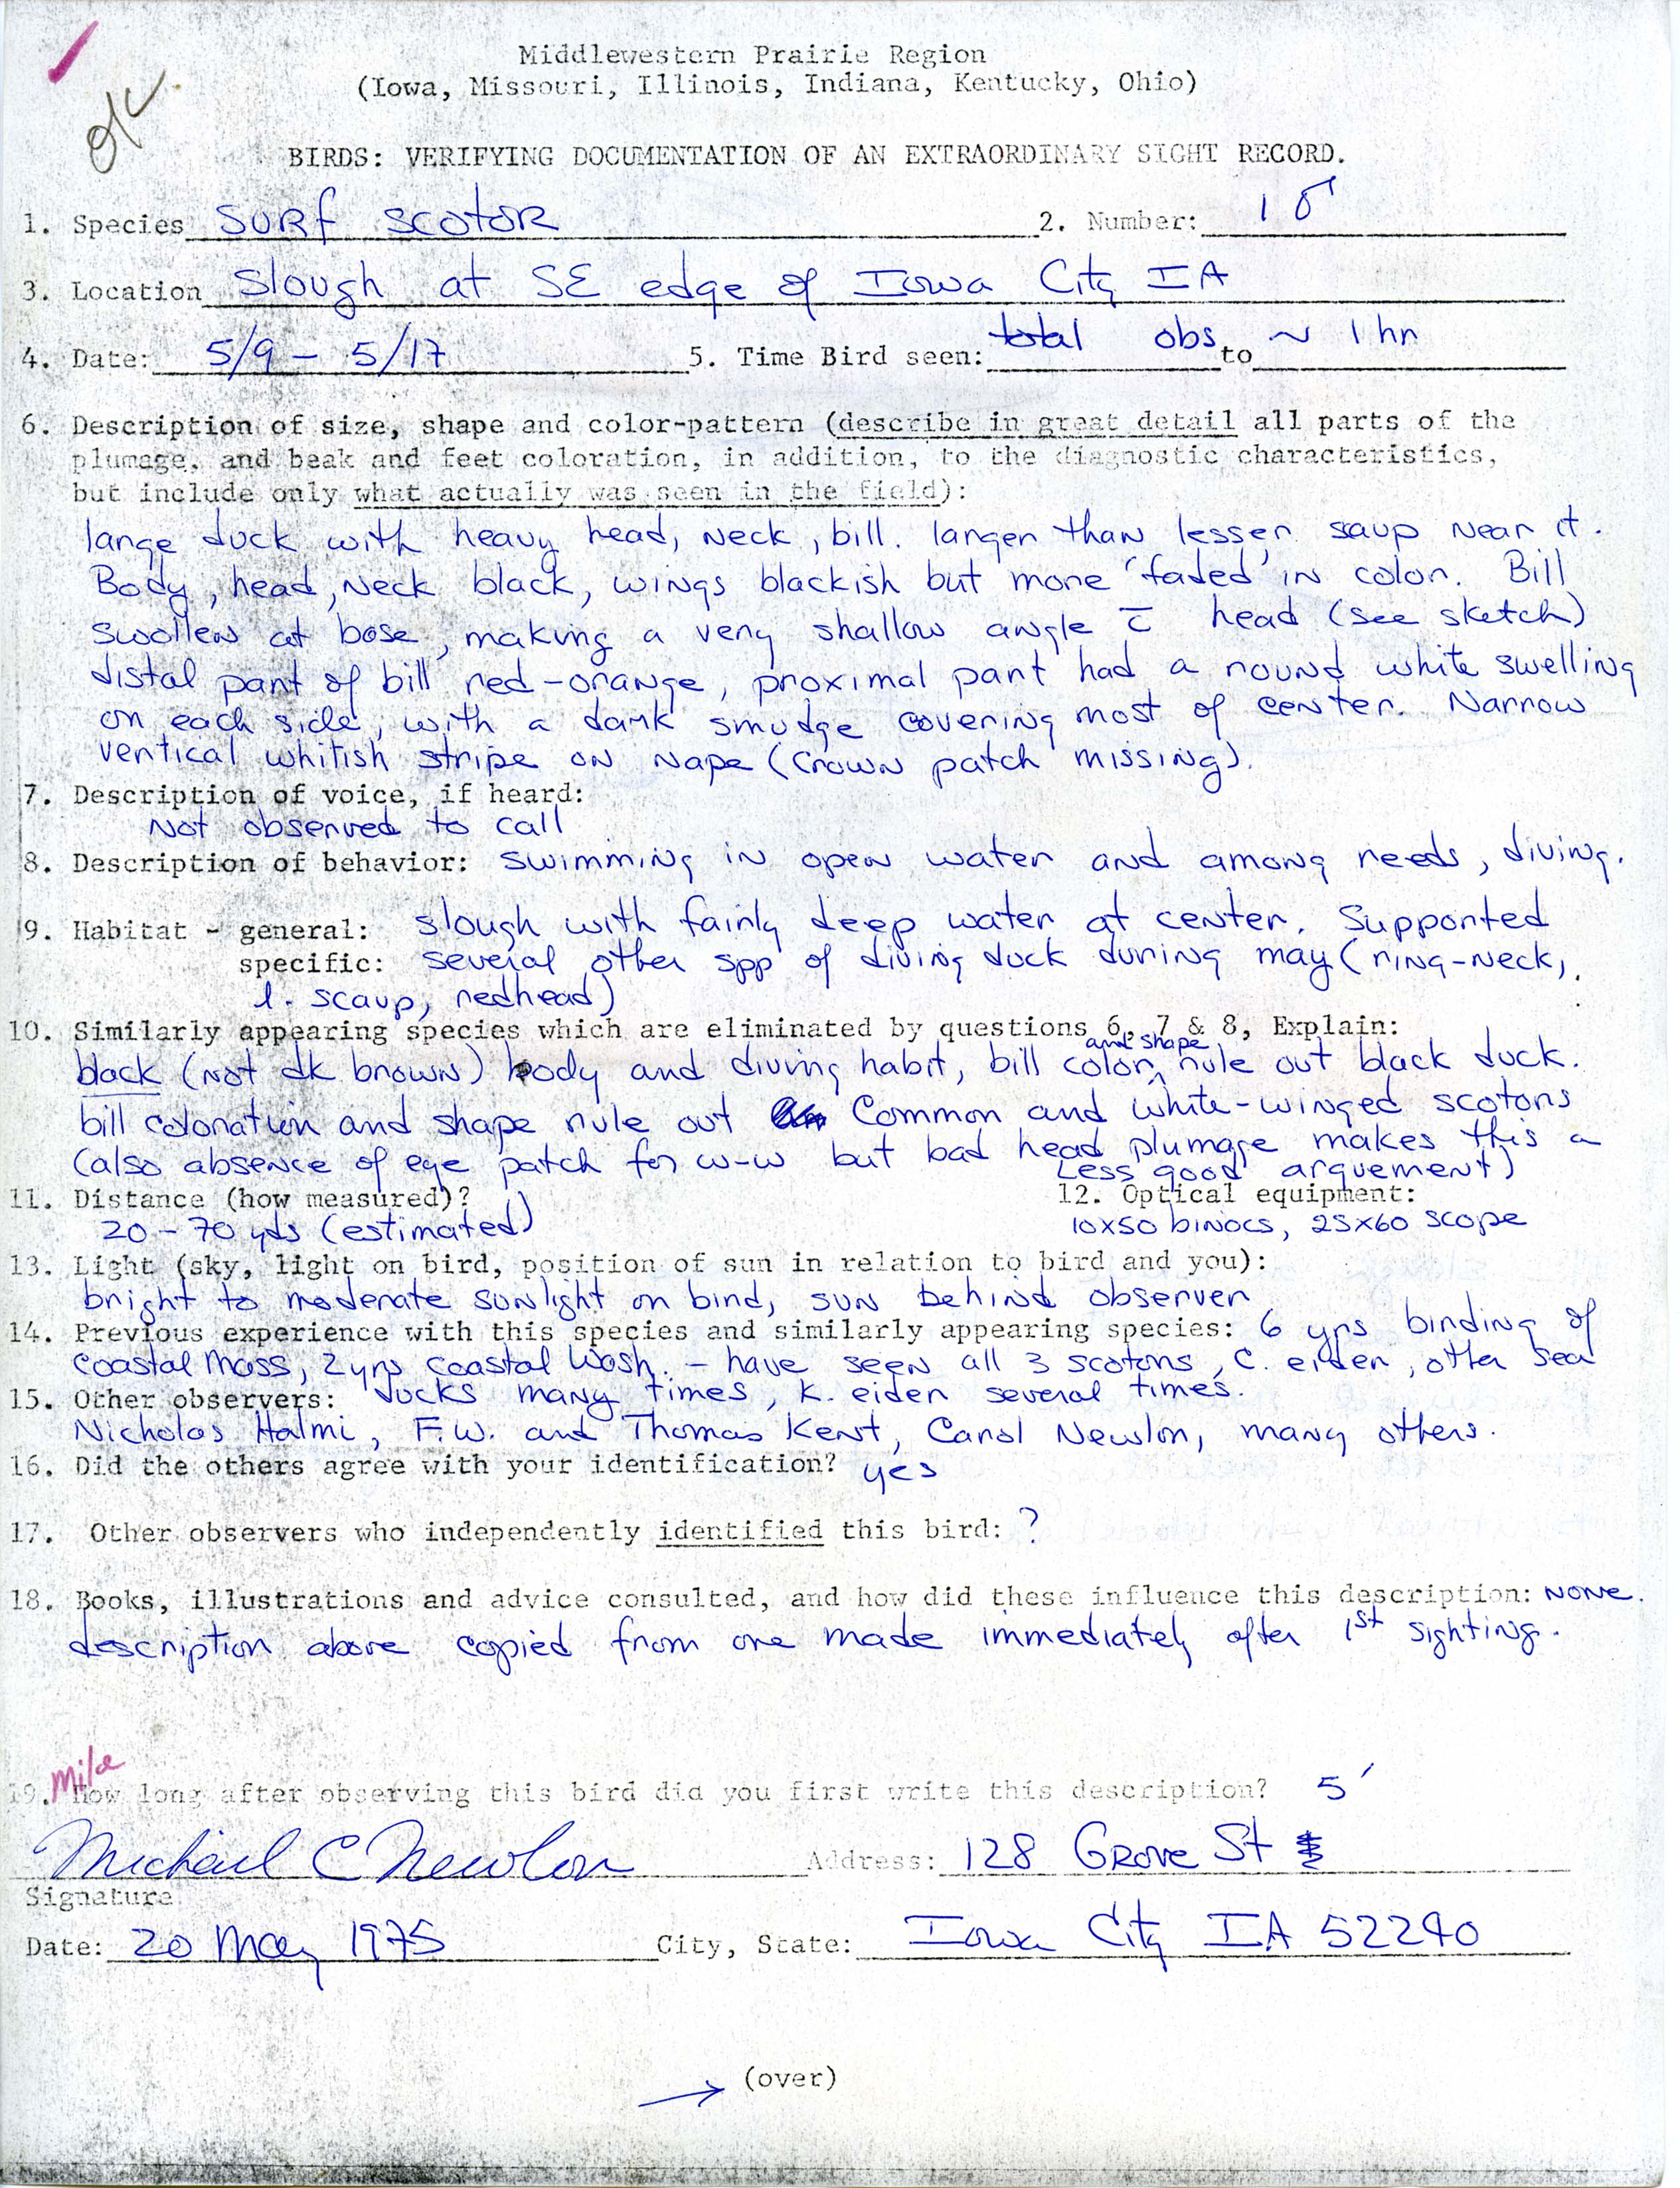 Rare bird documentation form for Surf Scoter at Iowa City in 1975